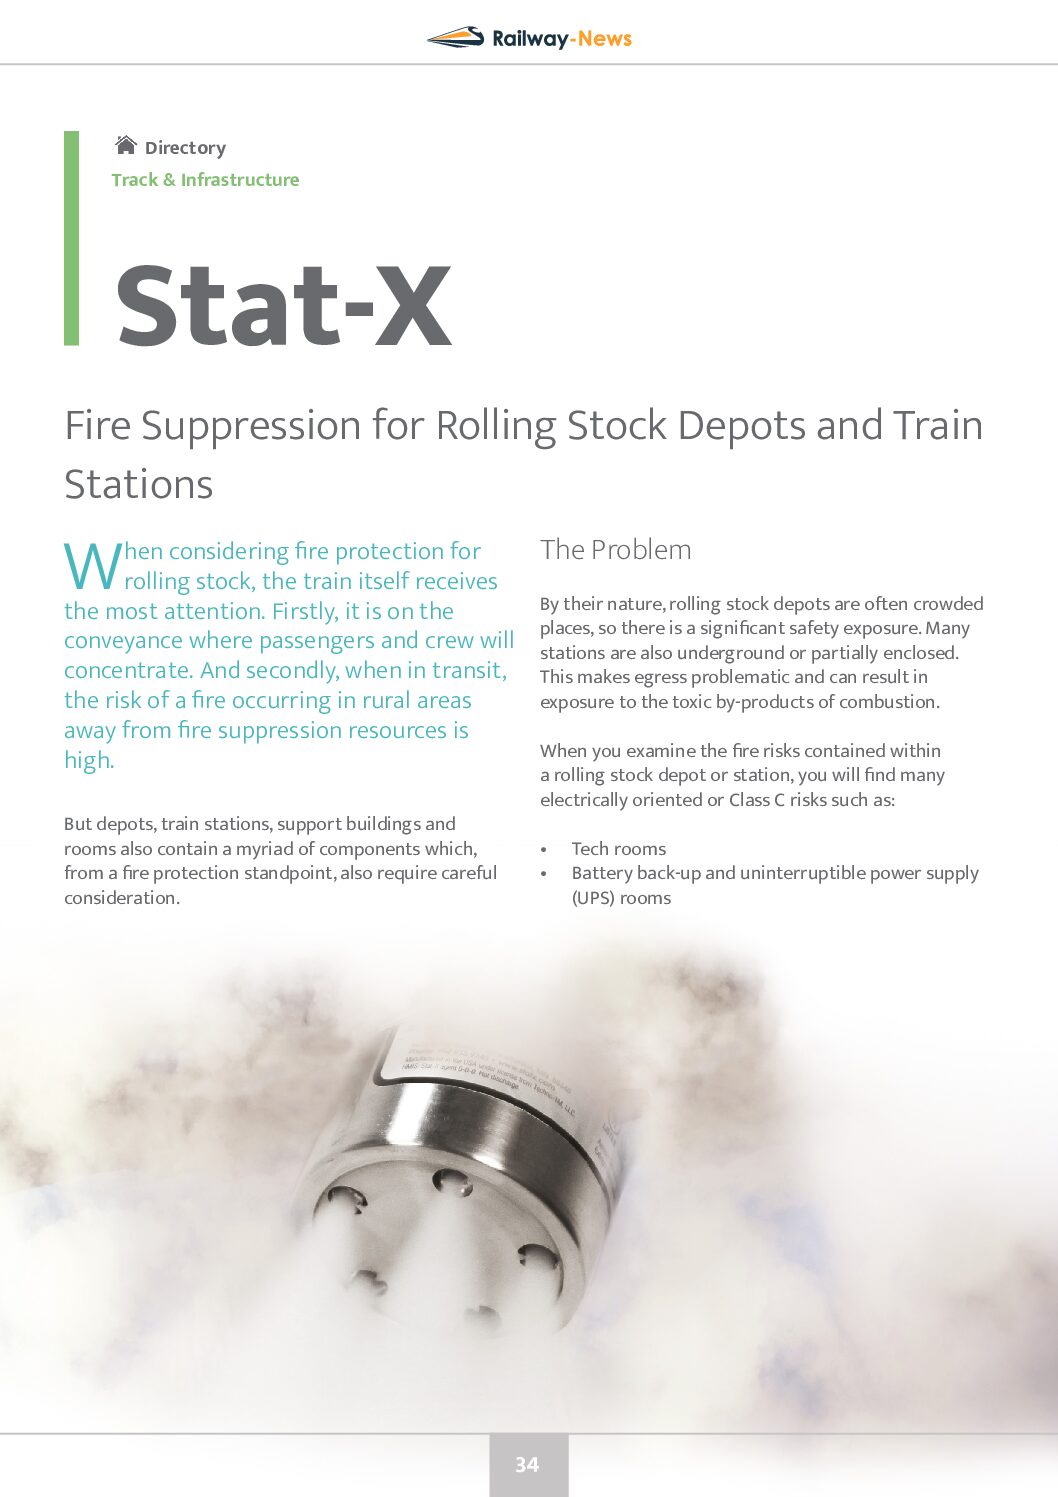 Fire Suppression for Rolling Stock Depots and Train Stations